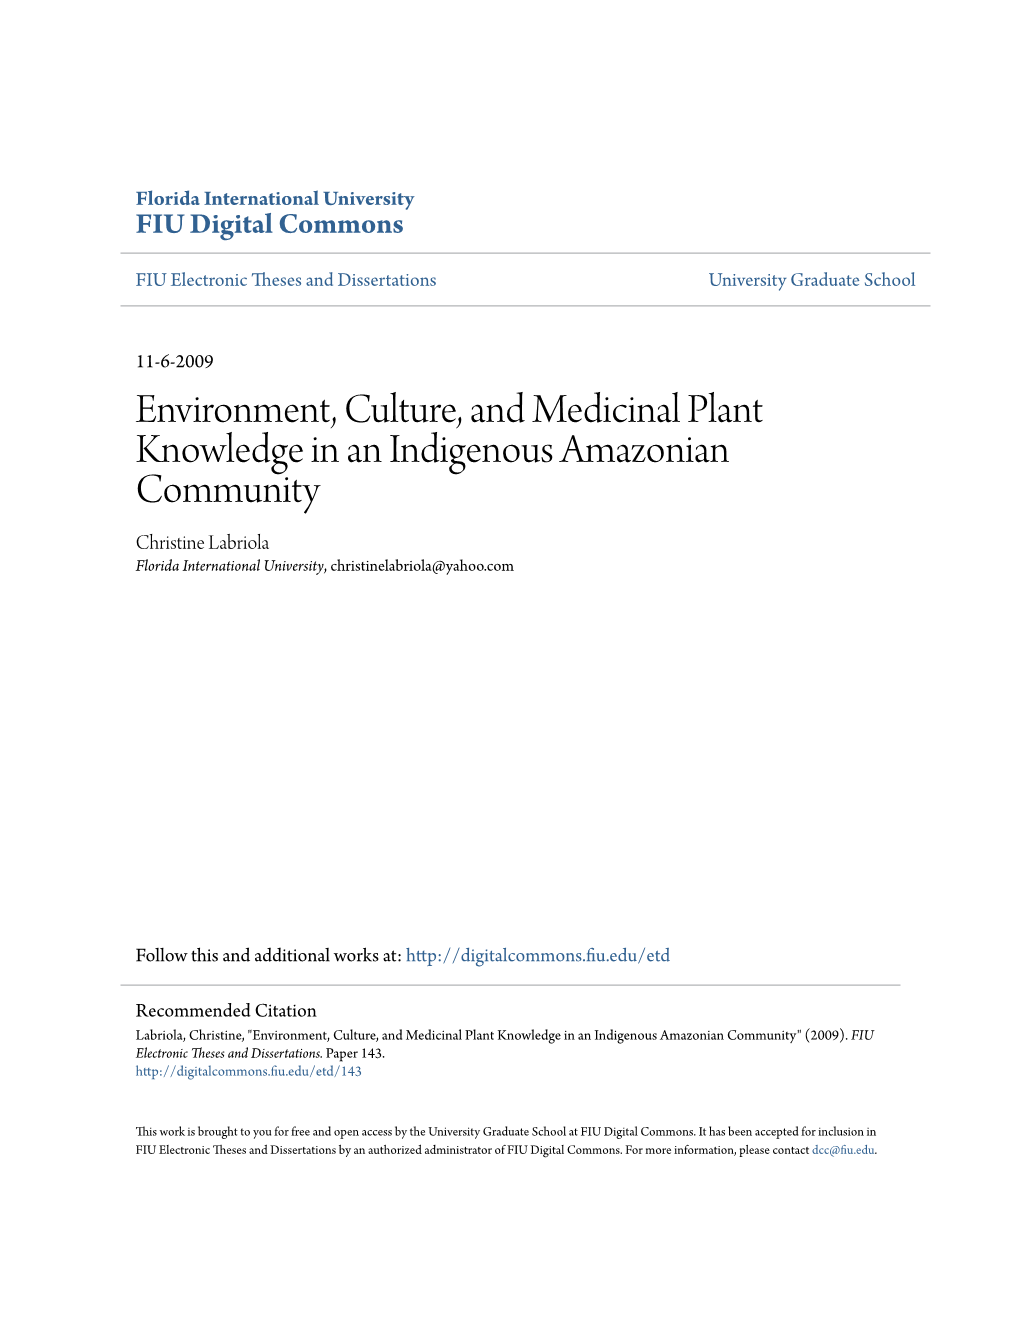 Environment, Culture, and Medicinal Plant Knowledge in An